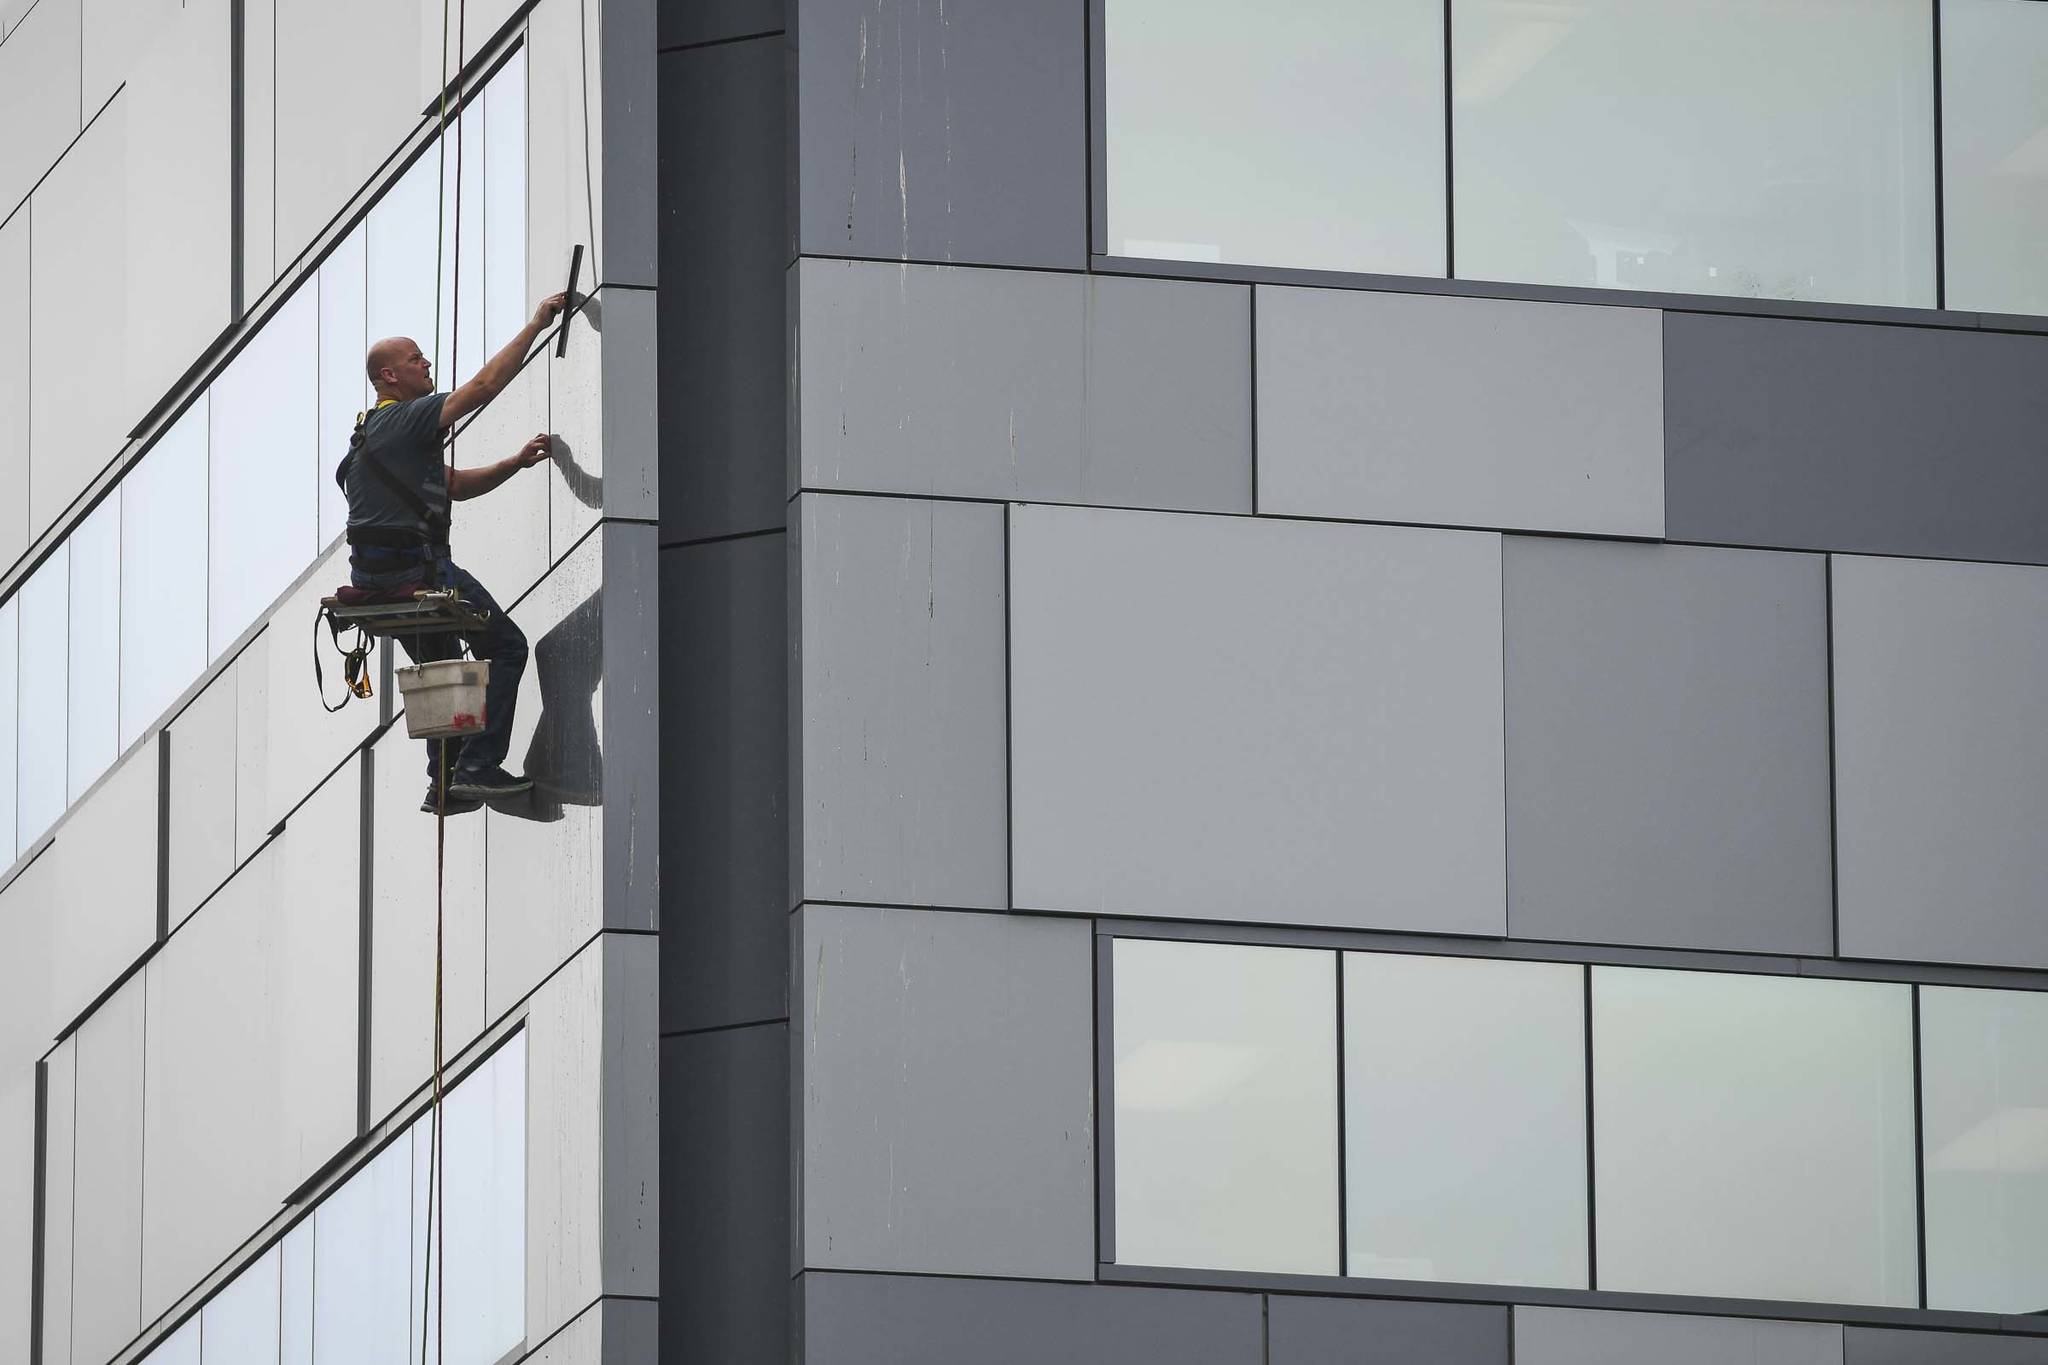 Andy Engstrom cleans the windows and siding of the Court Plaza Building on Friday, July 26, 2019. (Michael Penn | Juneau Empire)